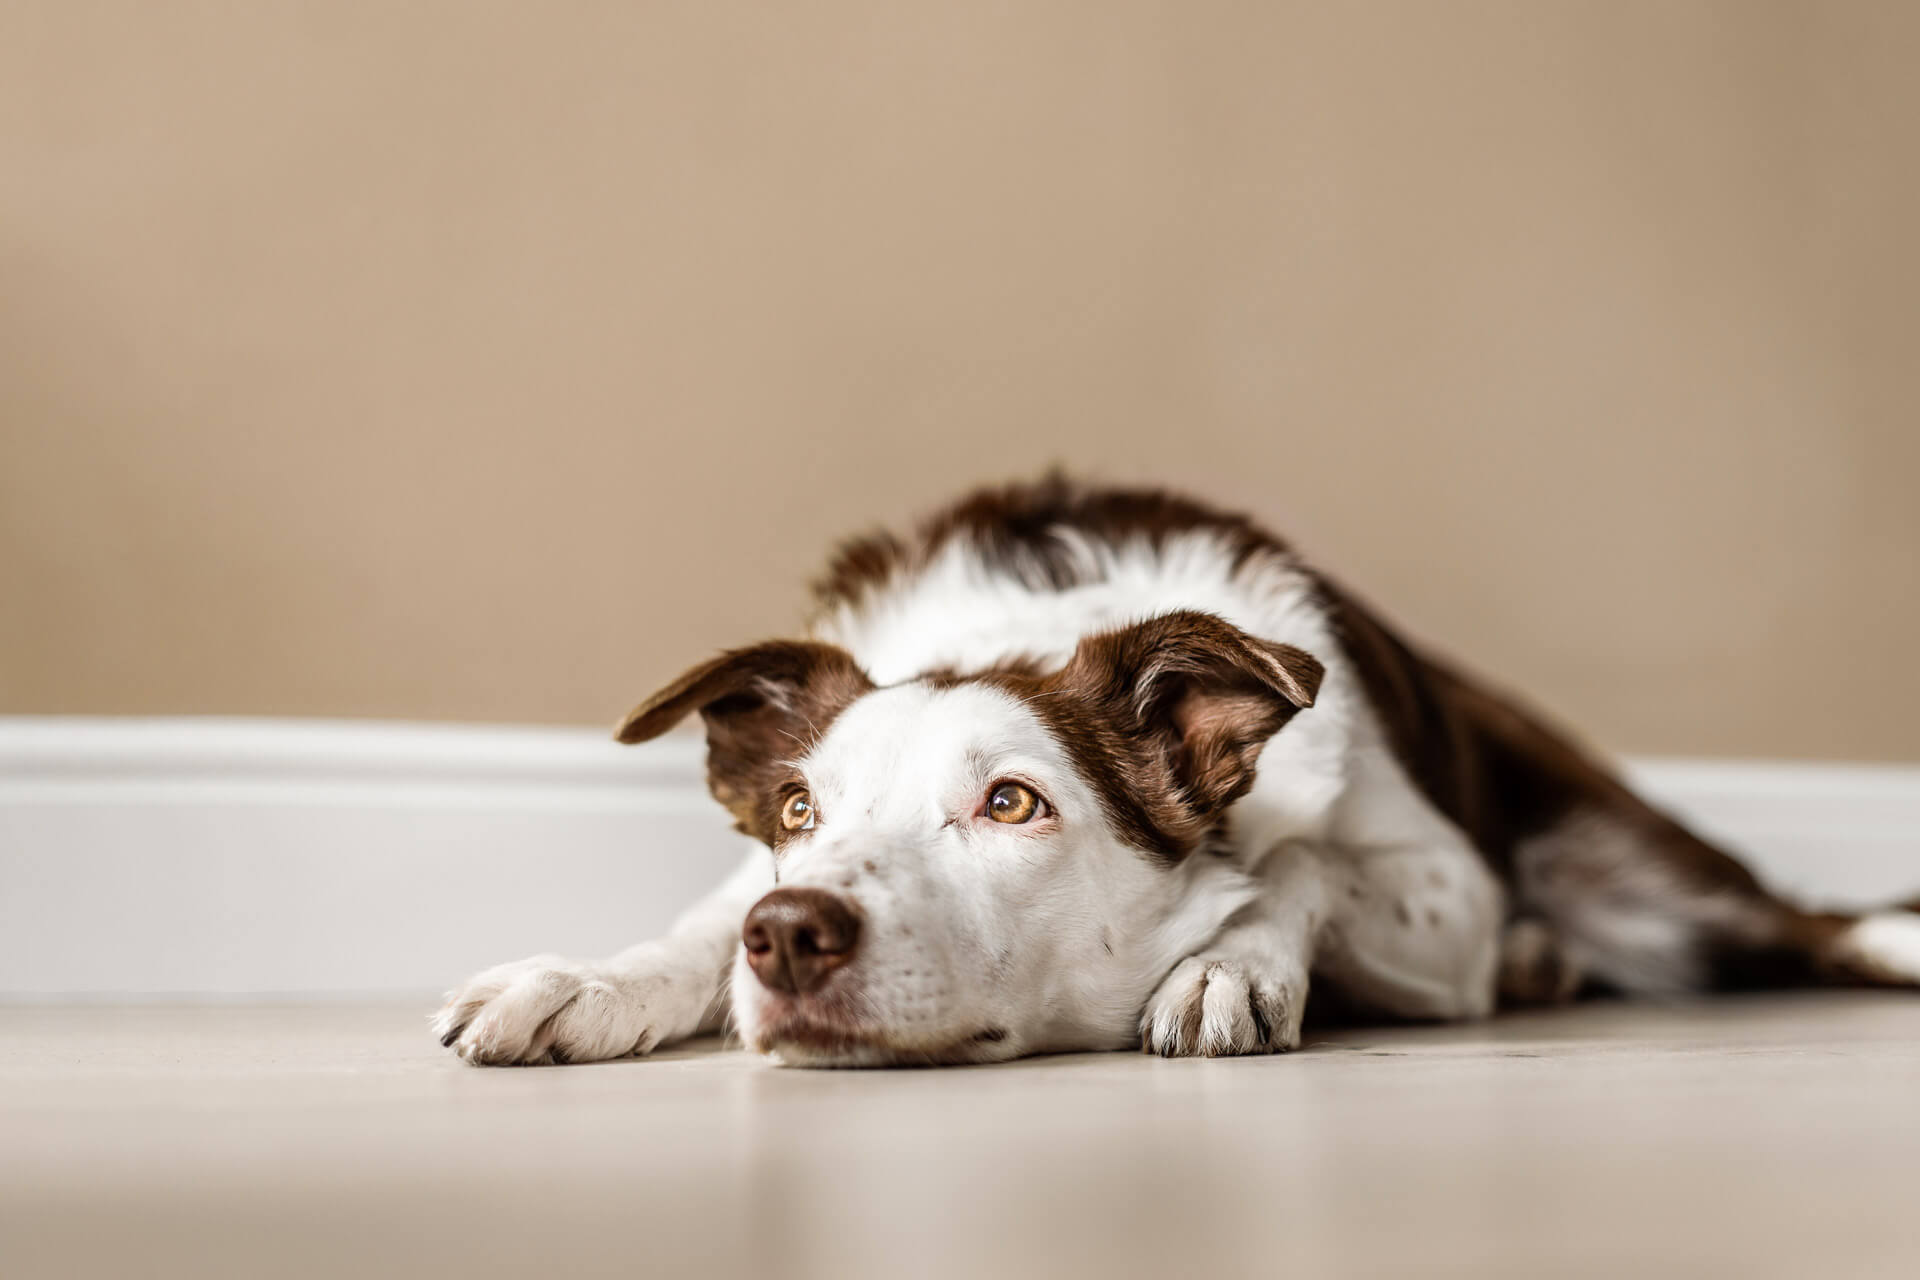 What happens if you give a dog too much wormer?